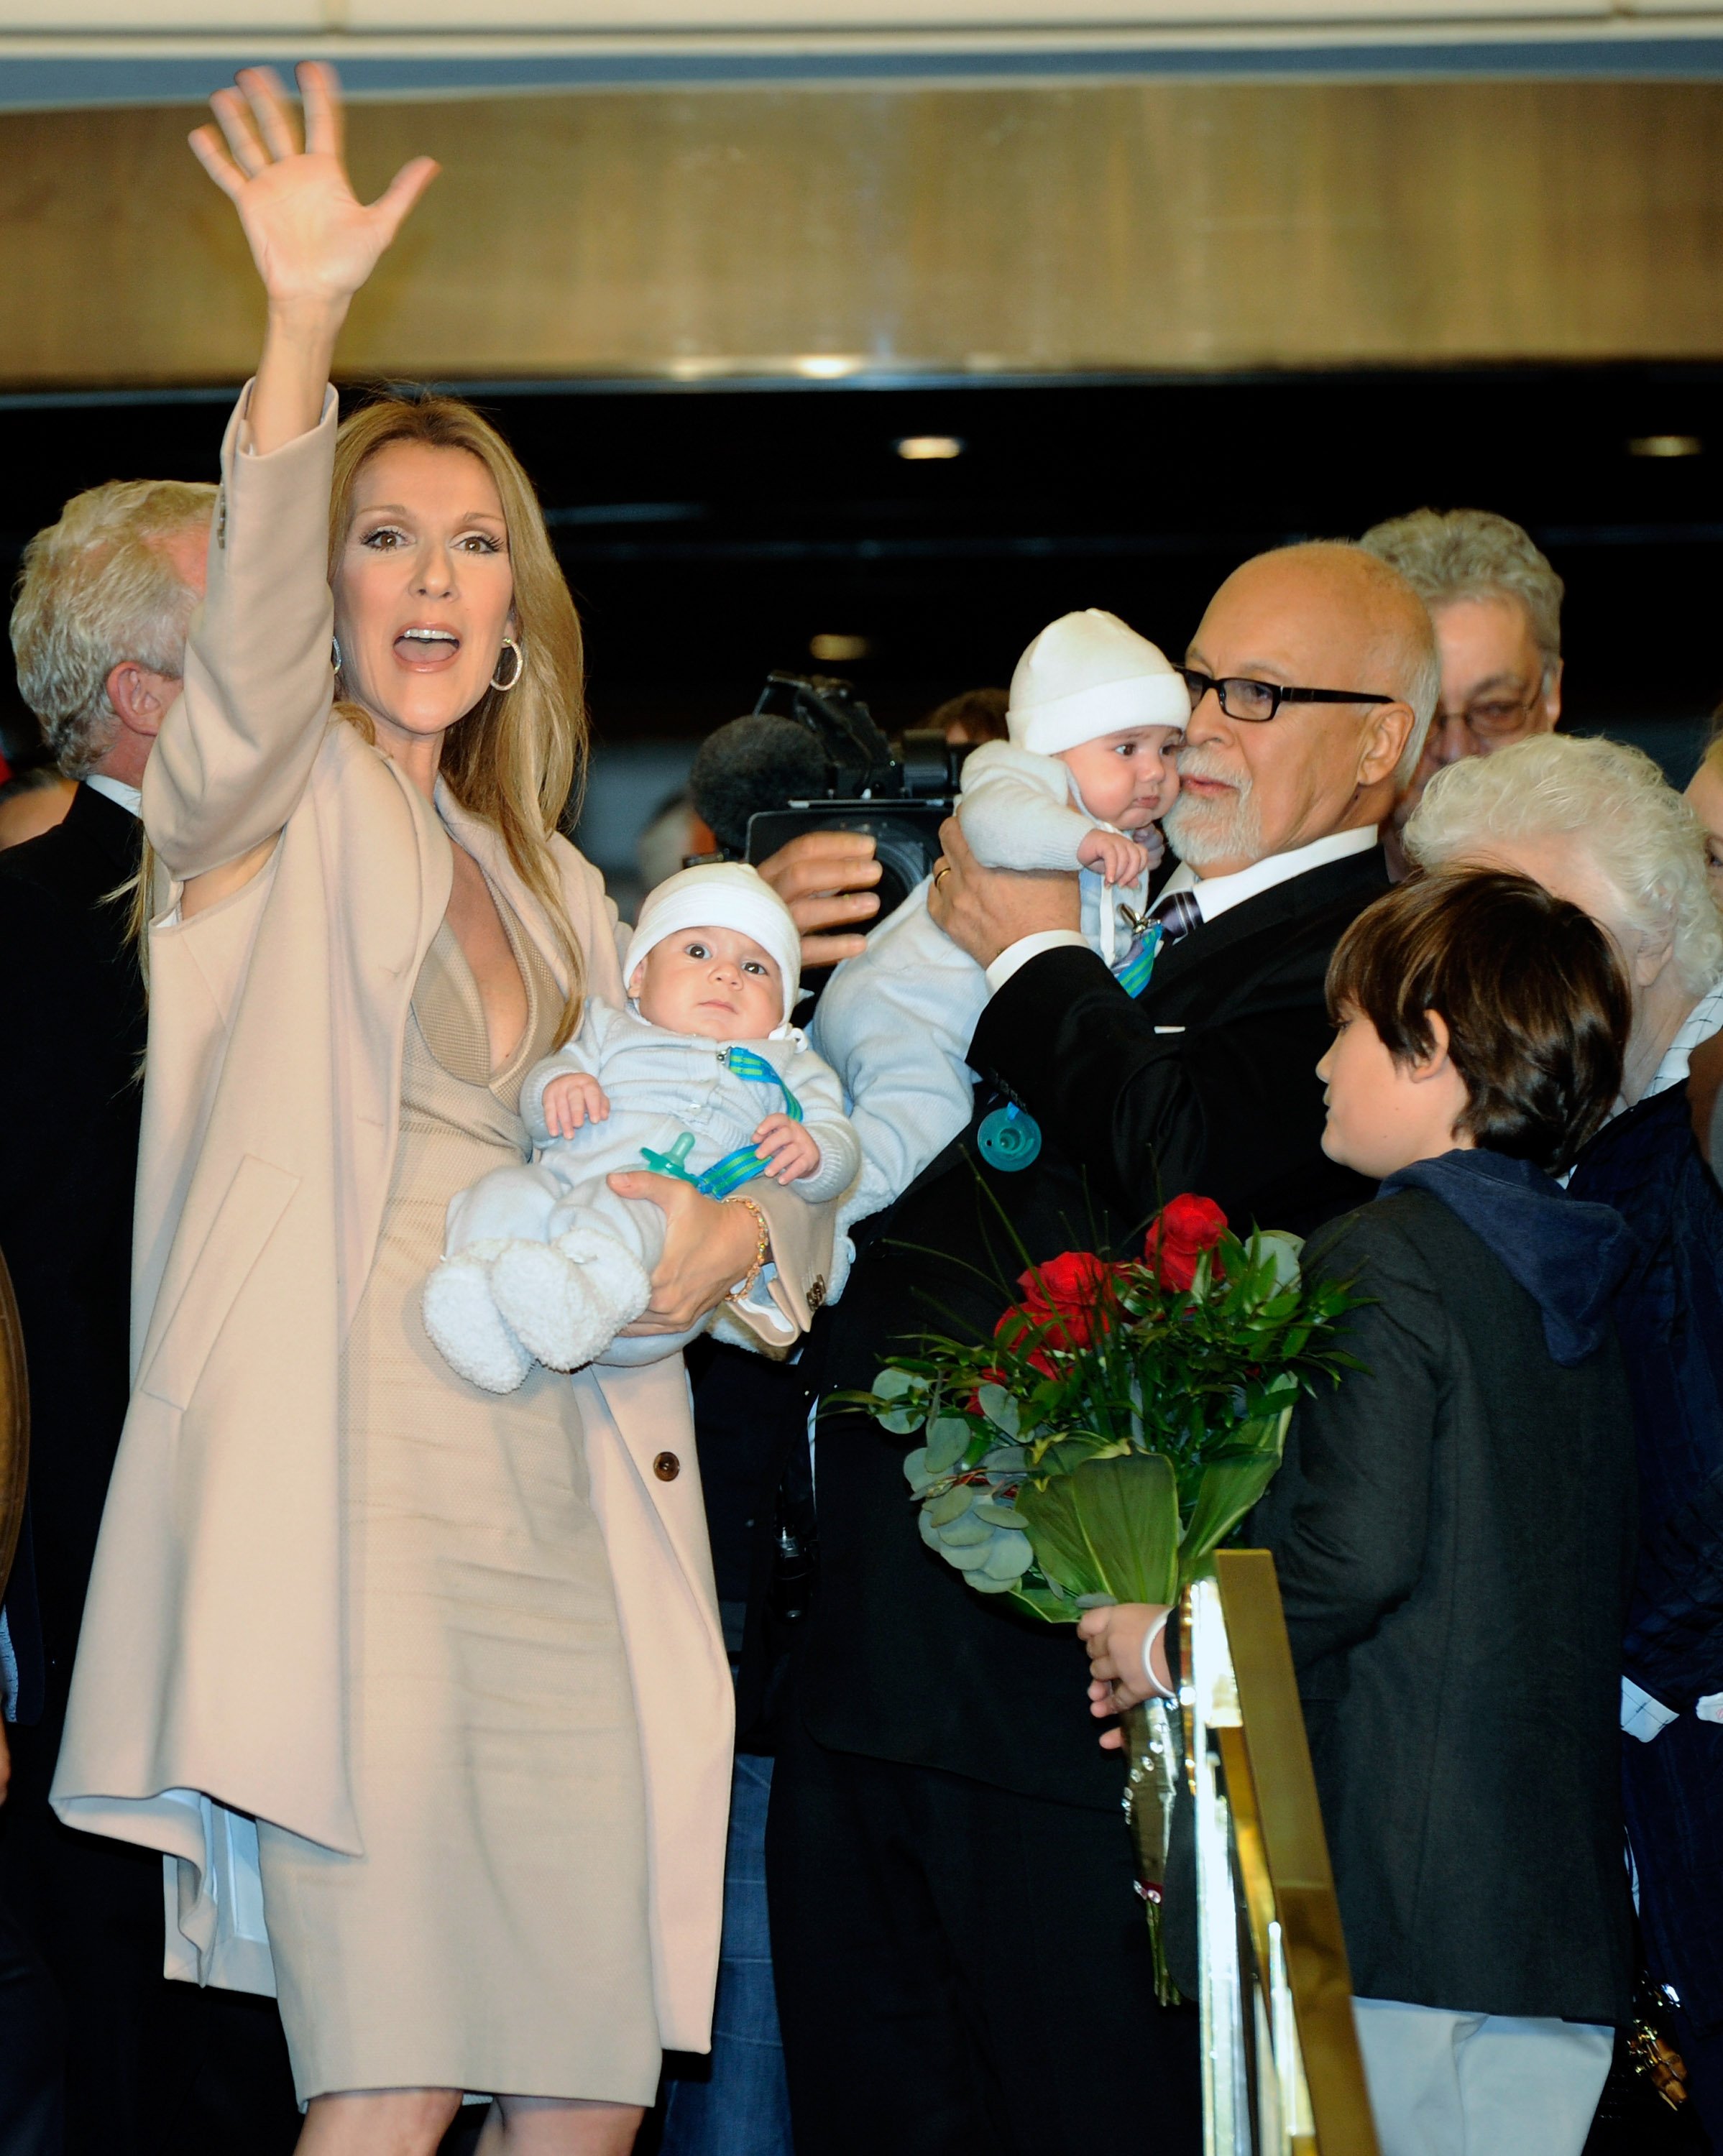 Celine Dion pictured waving while holding her son Nelson Angelil next to Rene Angelil, who holds their son Eddy Angelil, and their first child Rene-Charles Angelil while arriving at Caesars Palace on February 16, 2011 in Las Vegas, Nevada. / Source: Getty Images